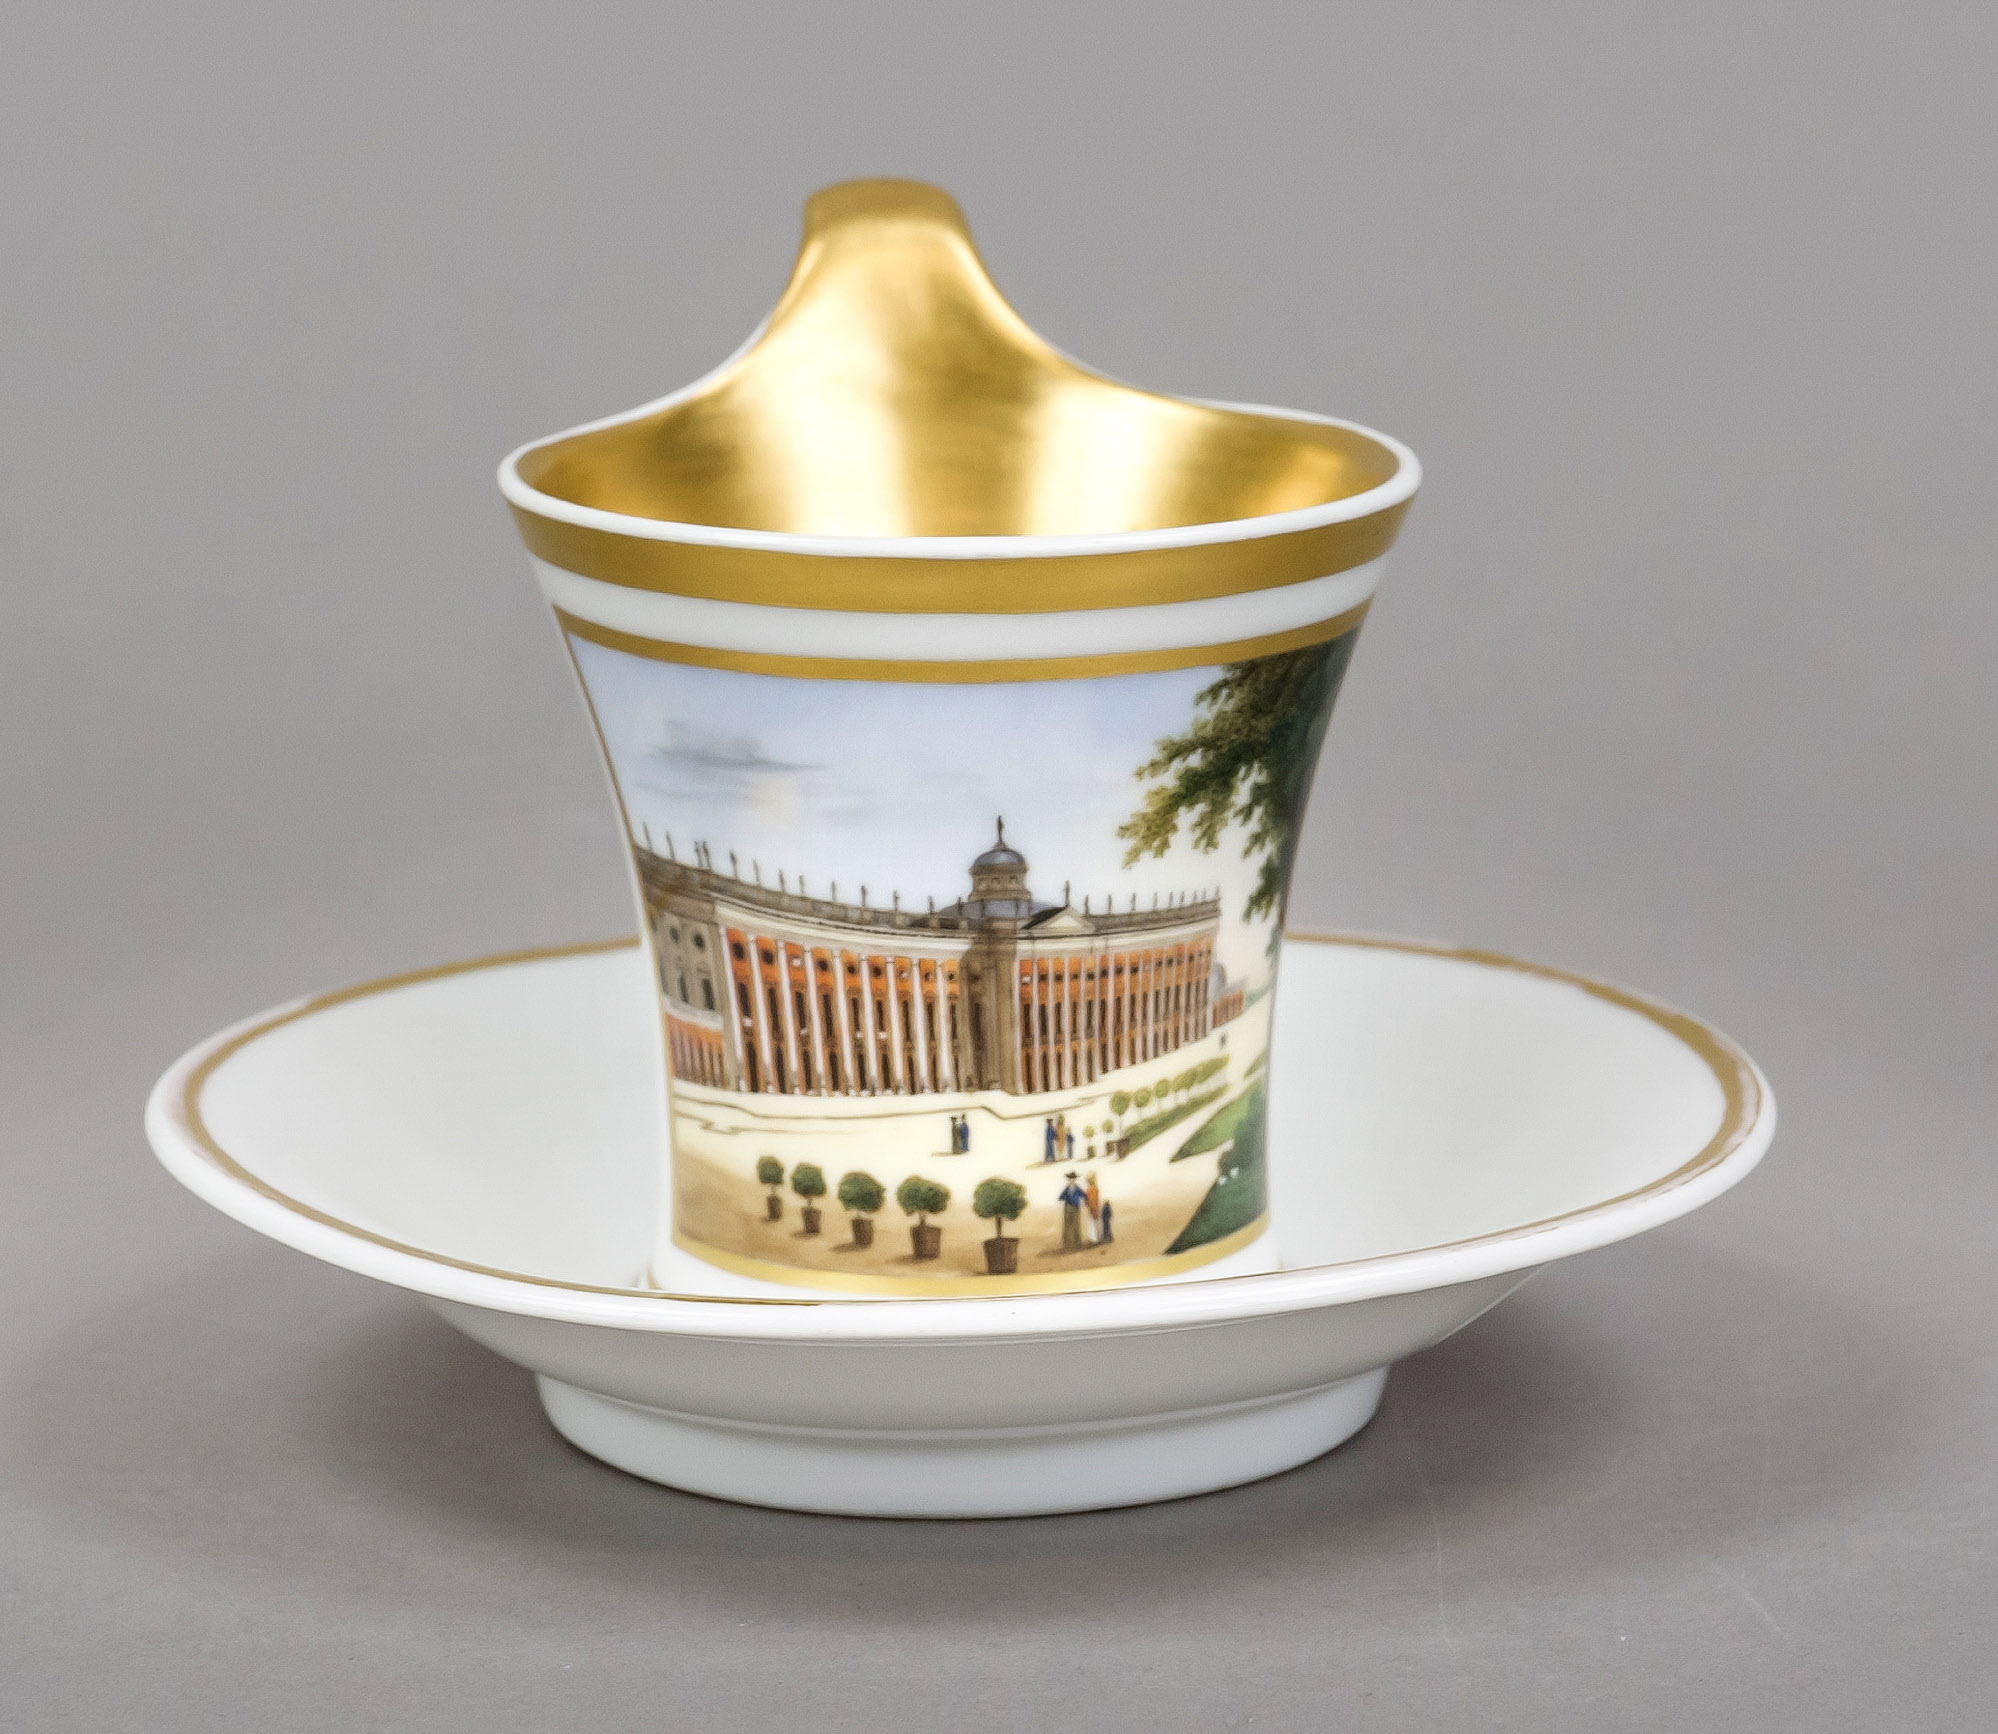 A view cup and saucer, KPM Berlin, mark 1830-40, 1st choice, Calathos form with raised campanile